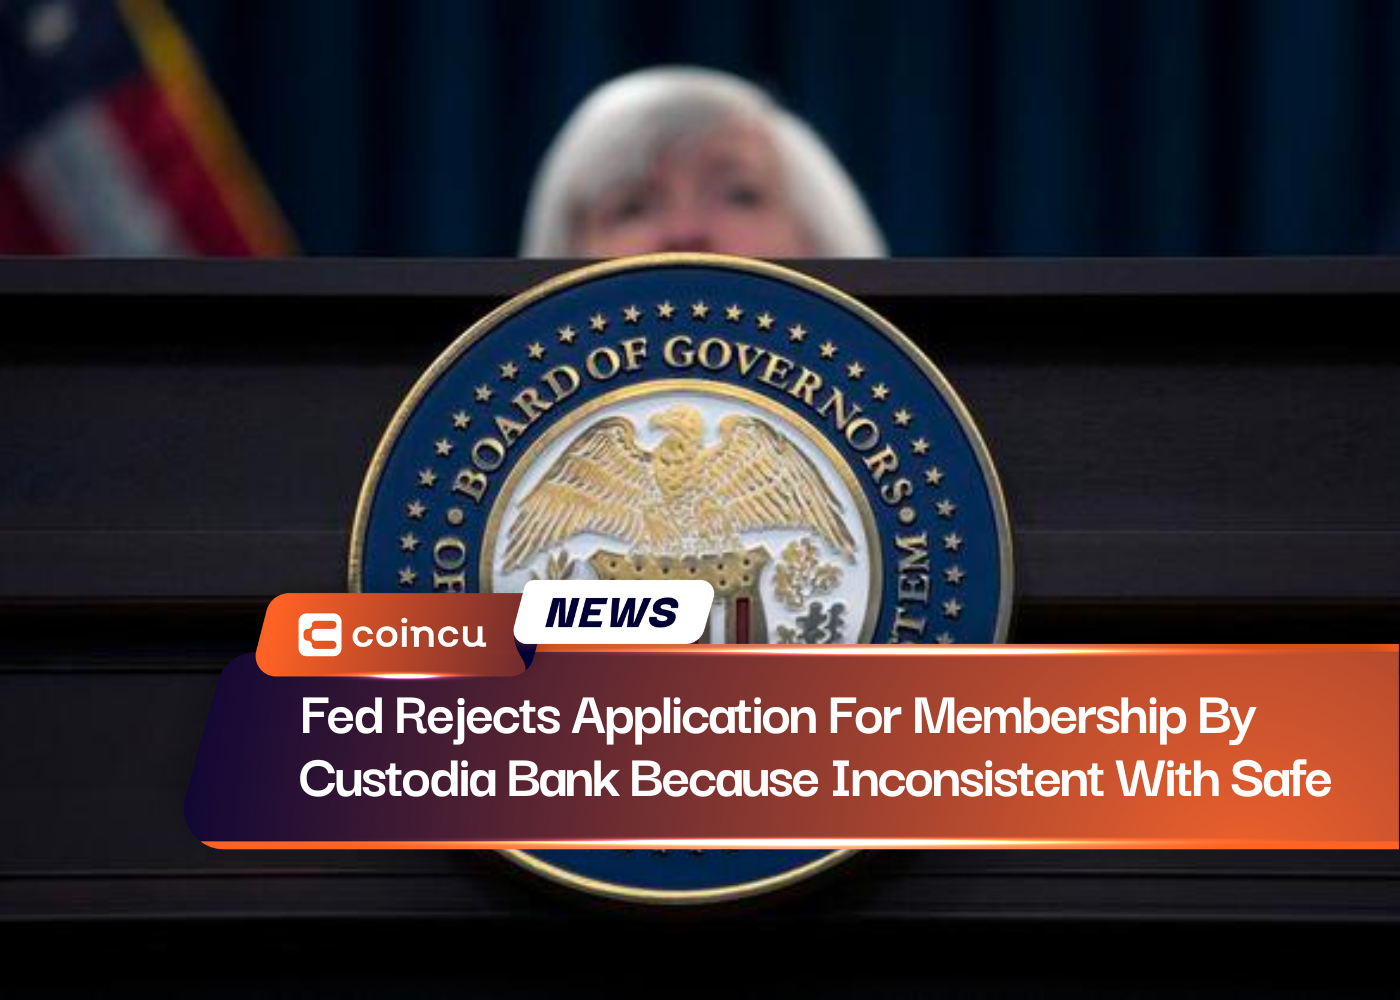 Fed Rejects Application For Membership By Custodia Bank Because Inconsistent With Safe